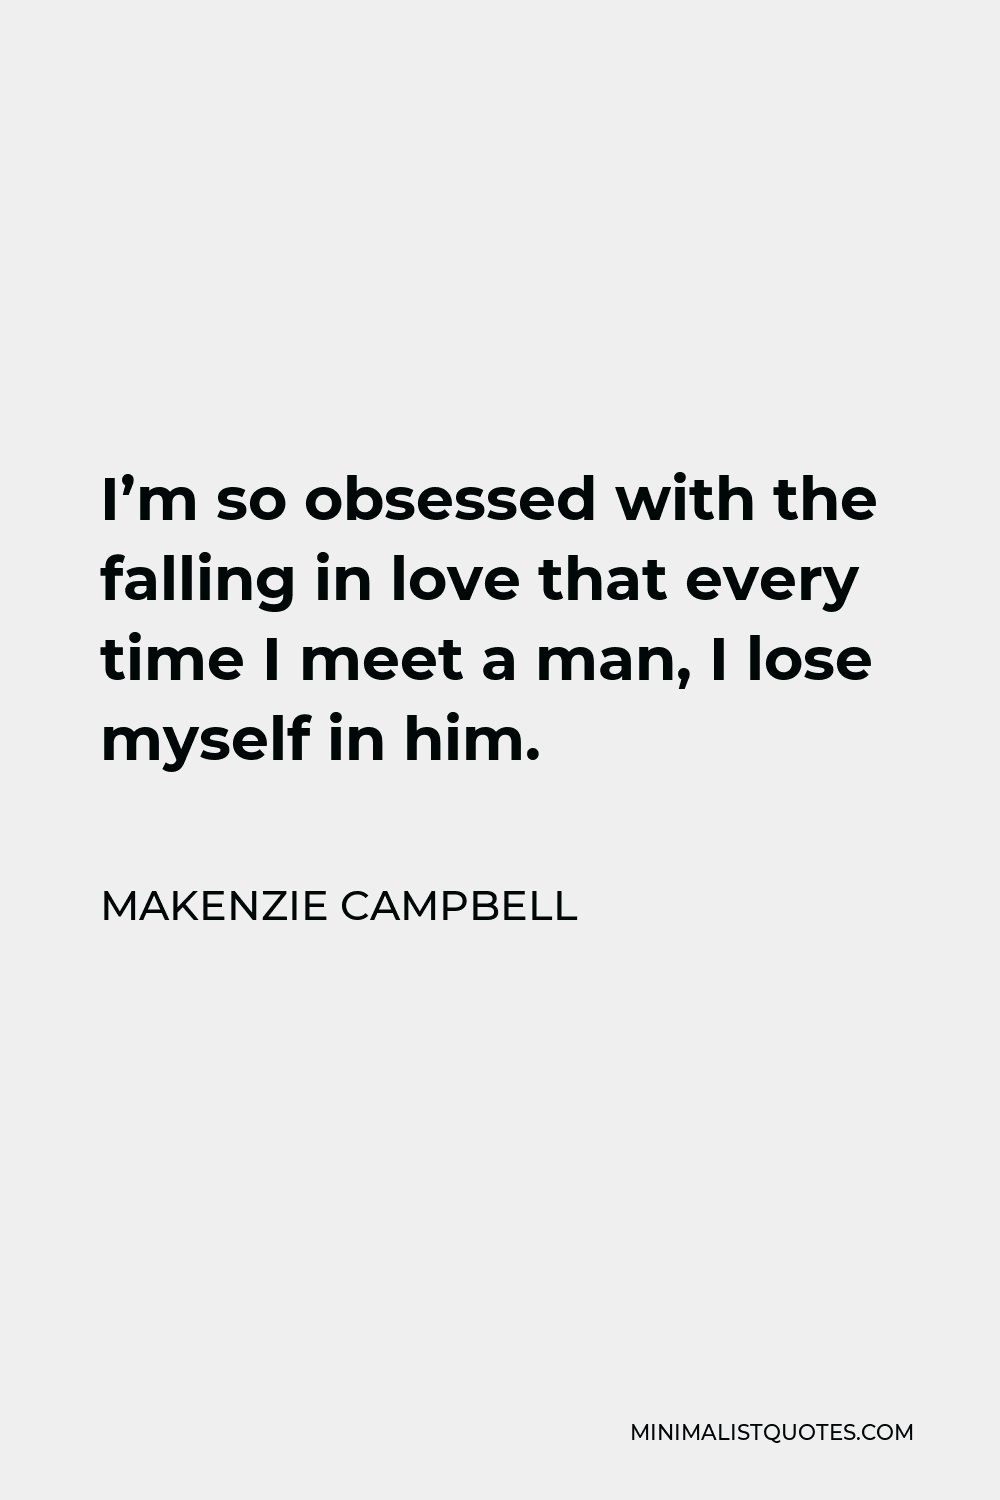 Makenzie Campbell Quote - I’m so obsessed with the falling in love that every time I meet a man, I lose myself in him.